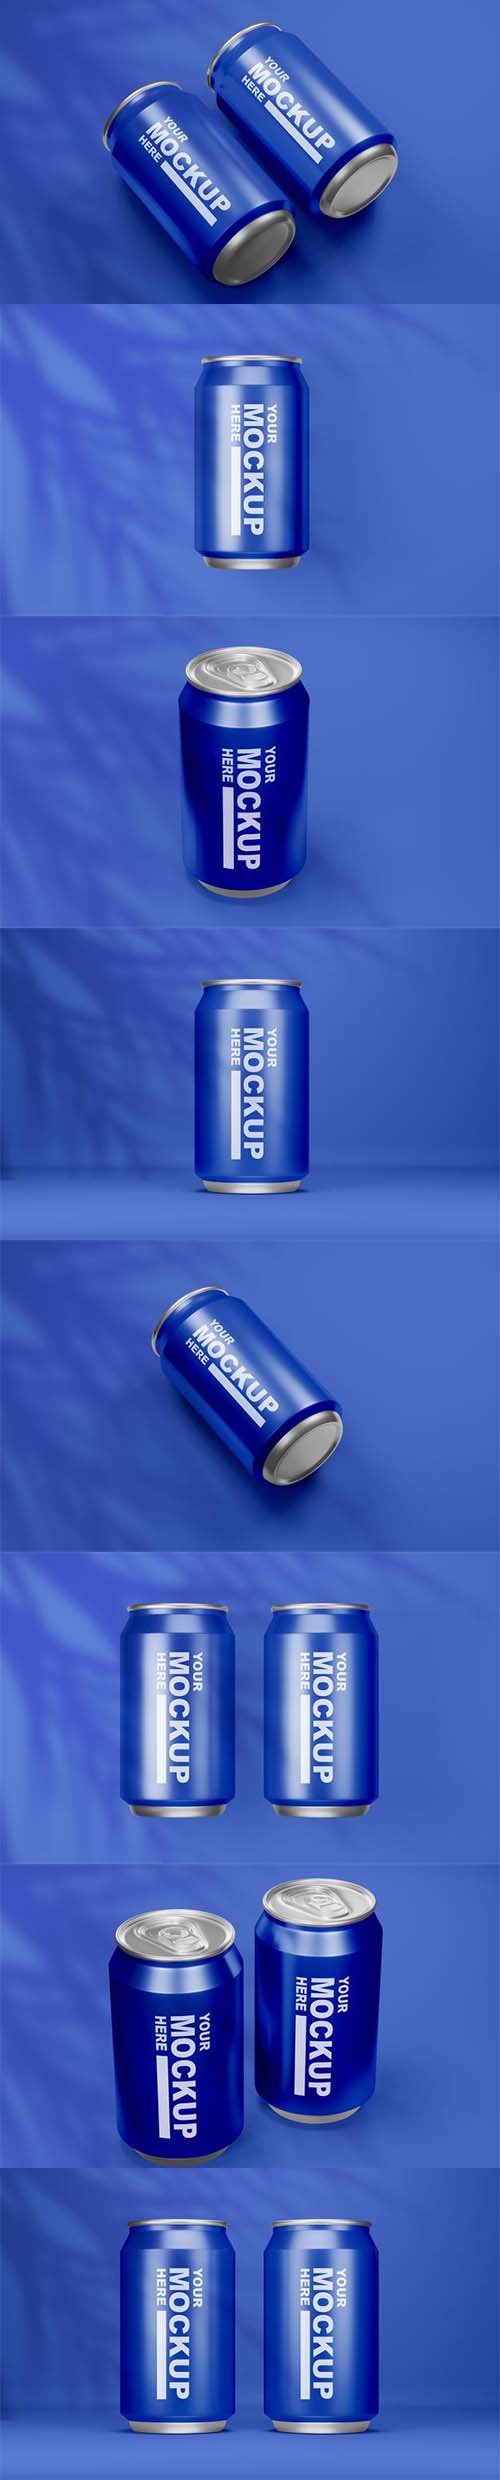 Drink can mockup